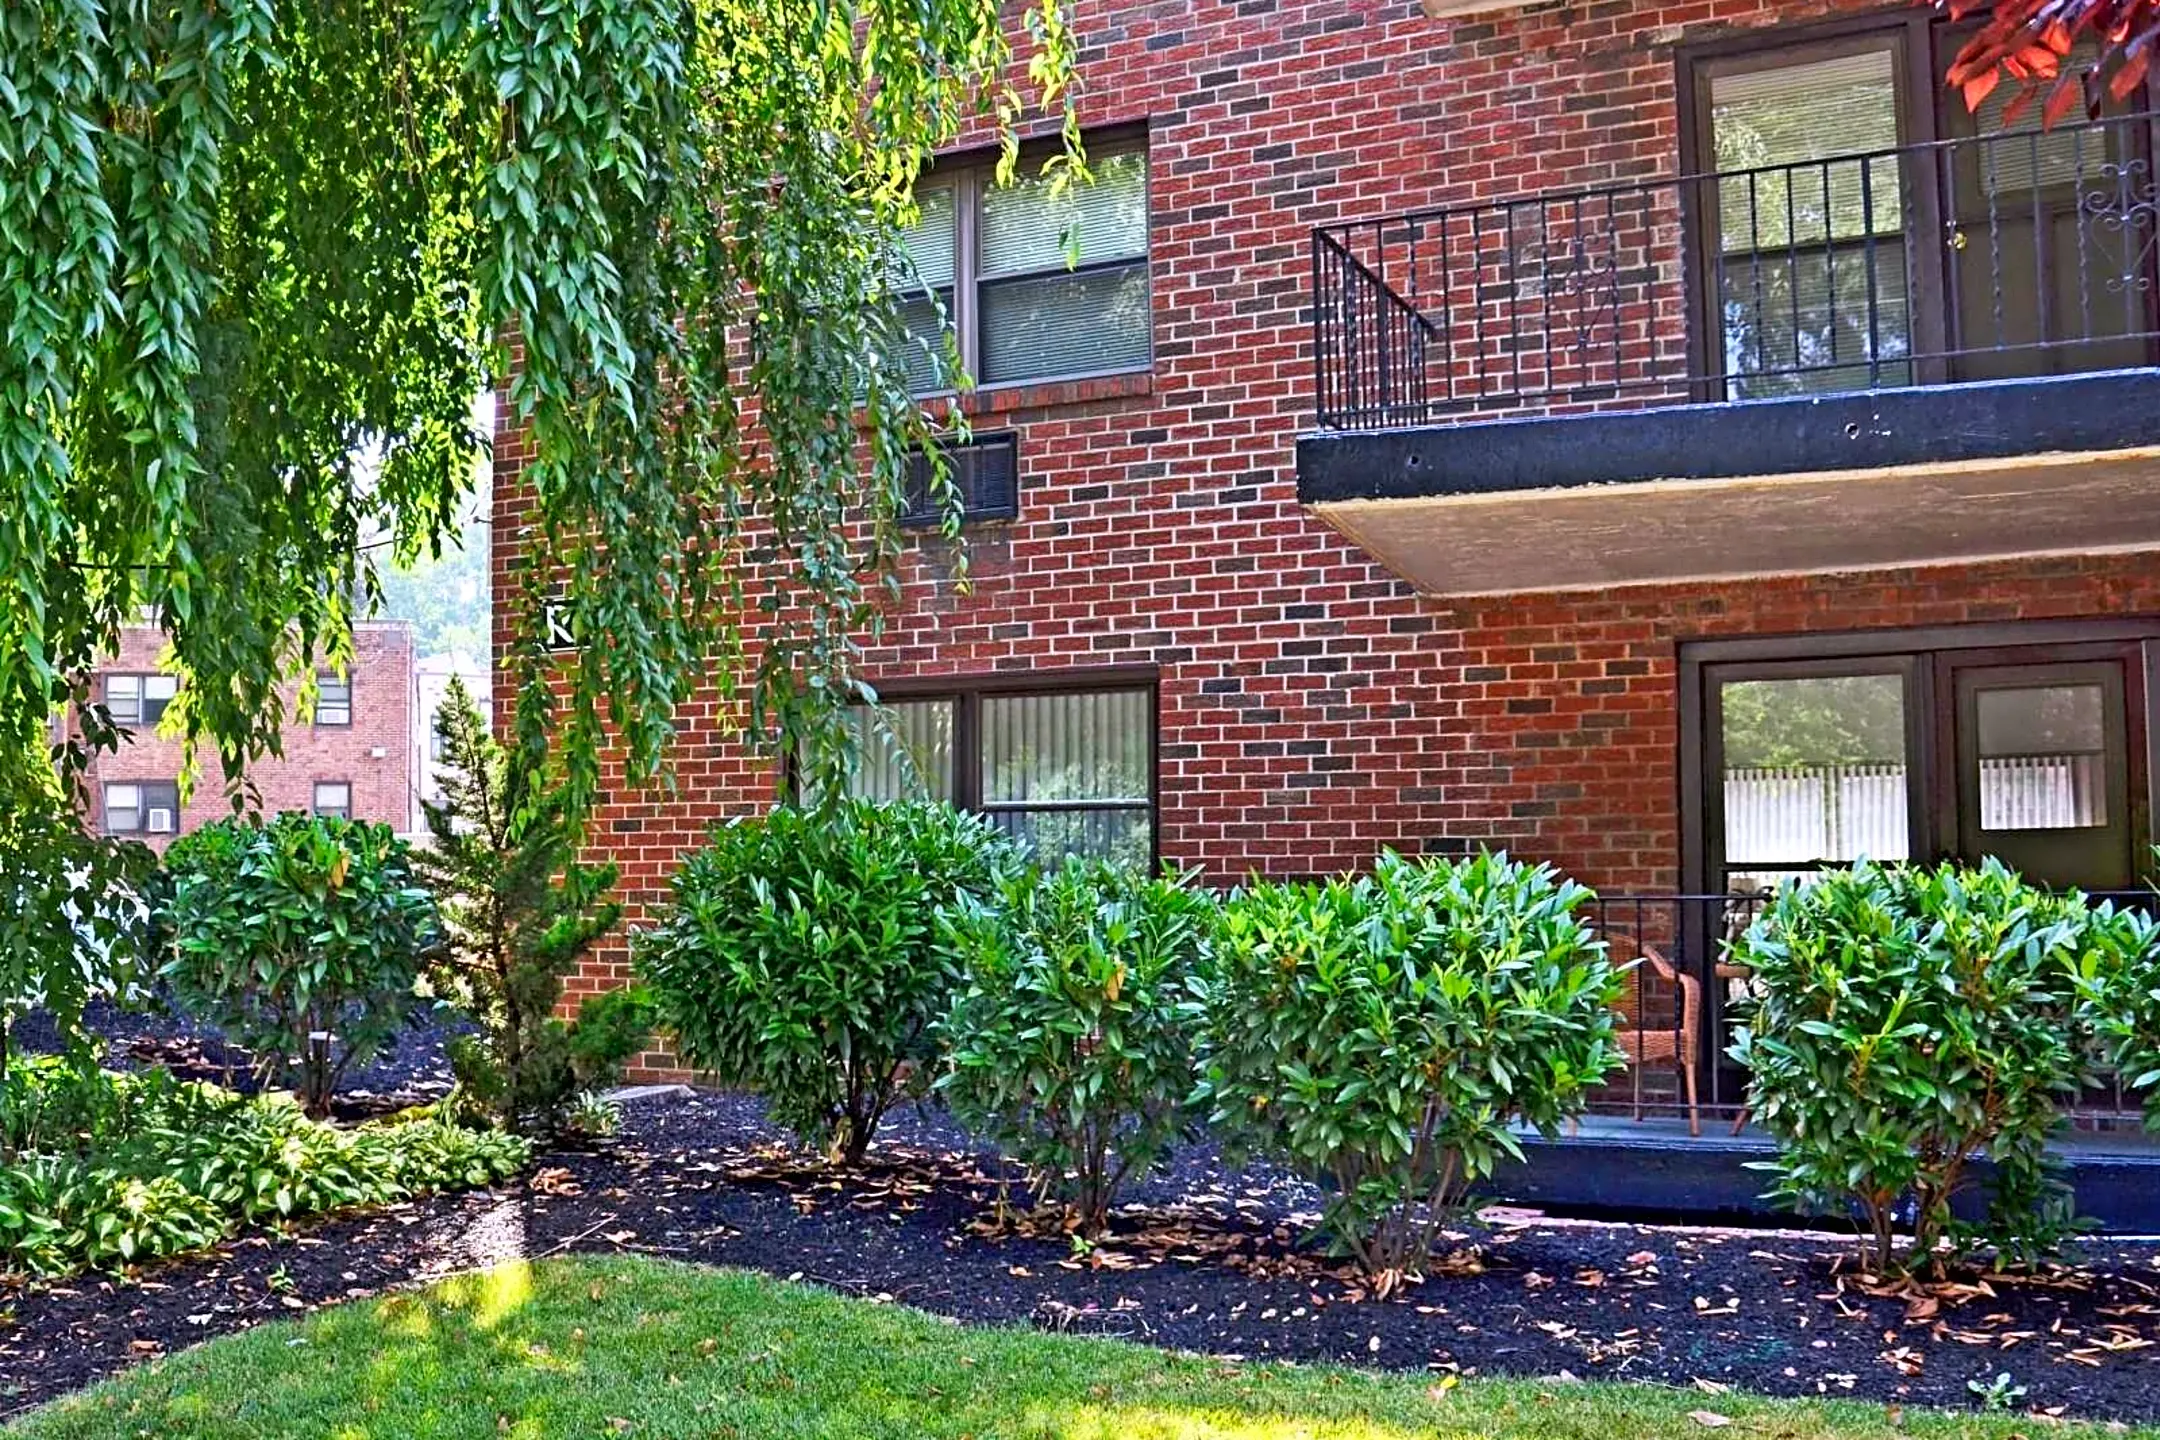 Landscaping - Tall Trees Village Apartments - Drexel Hill, PA